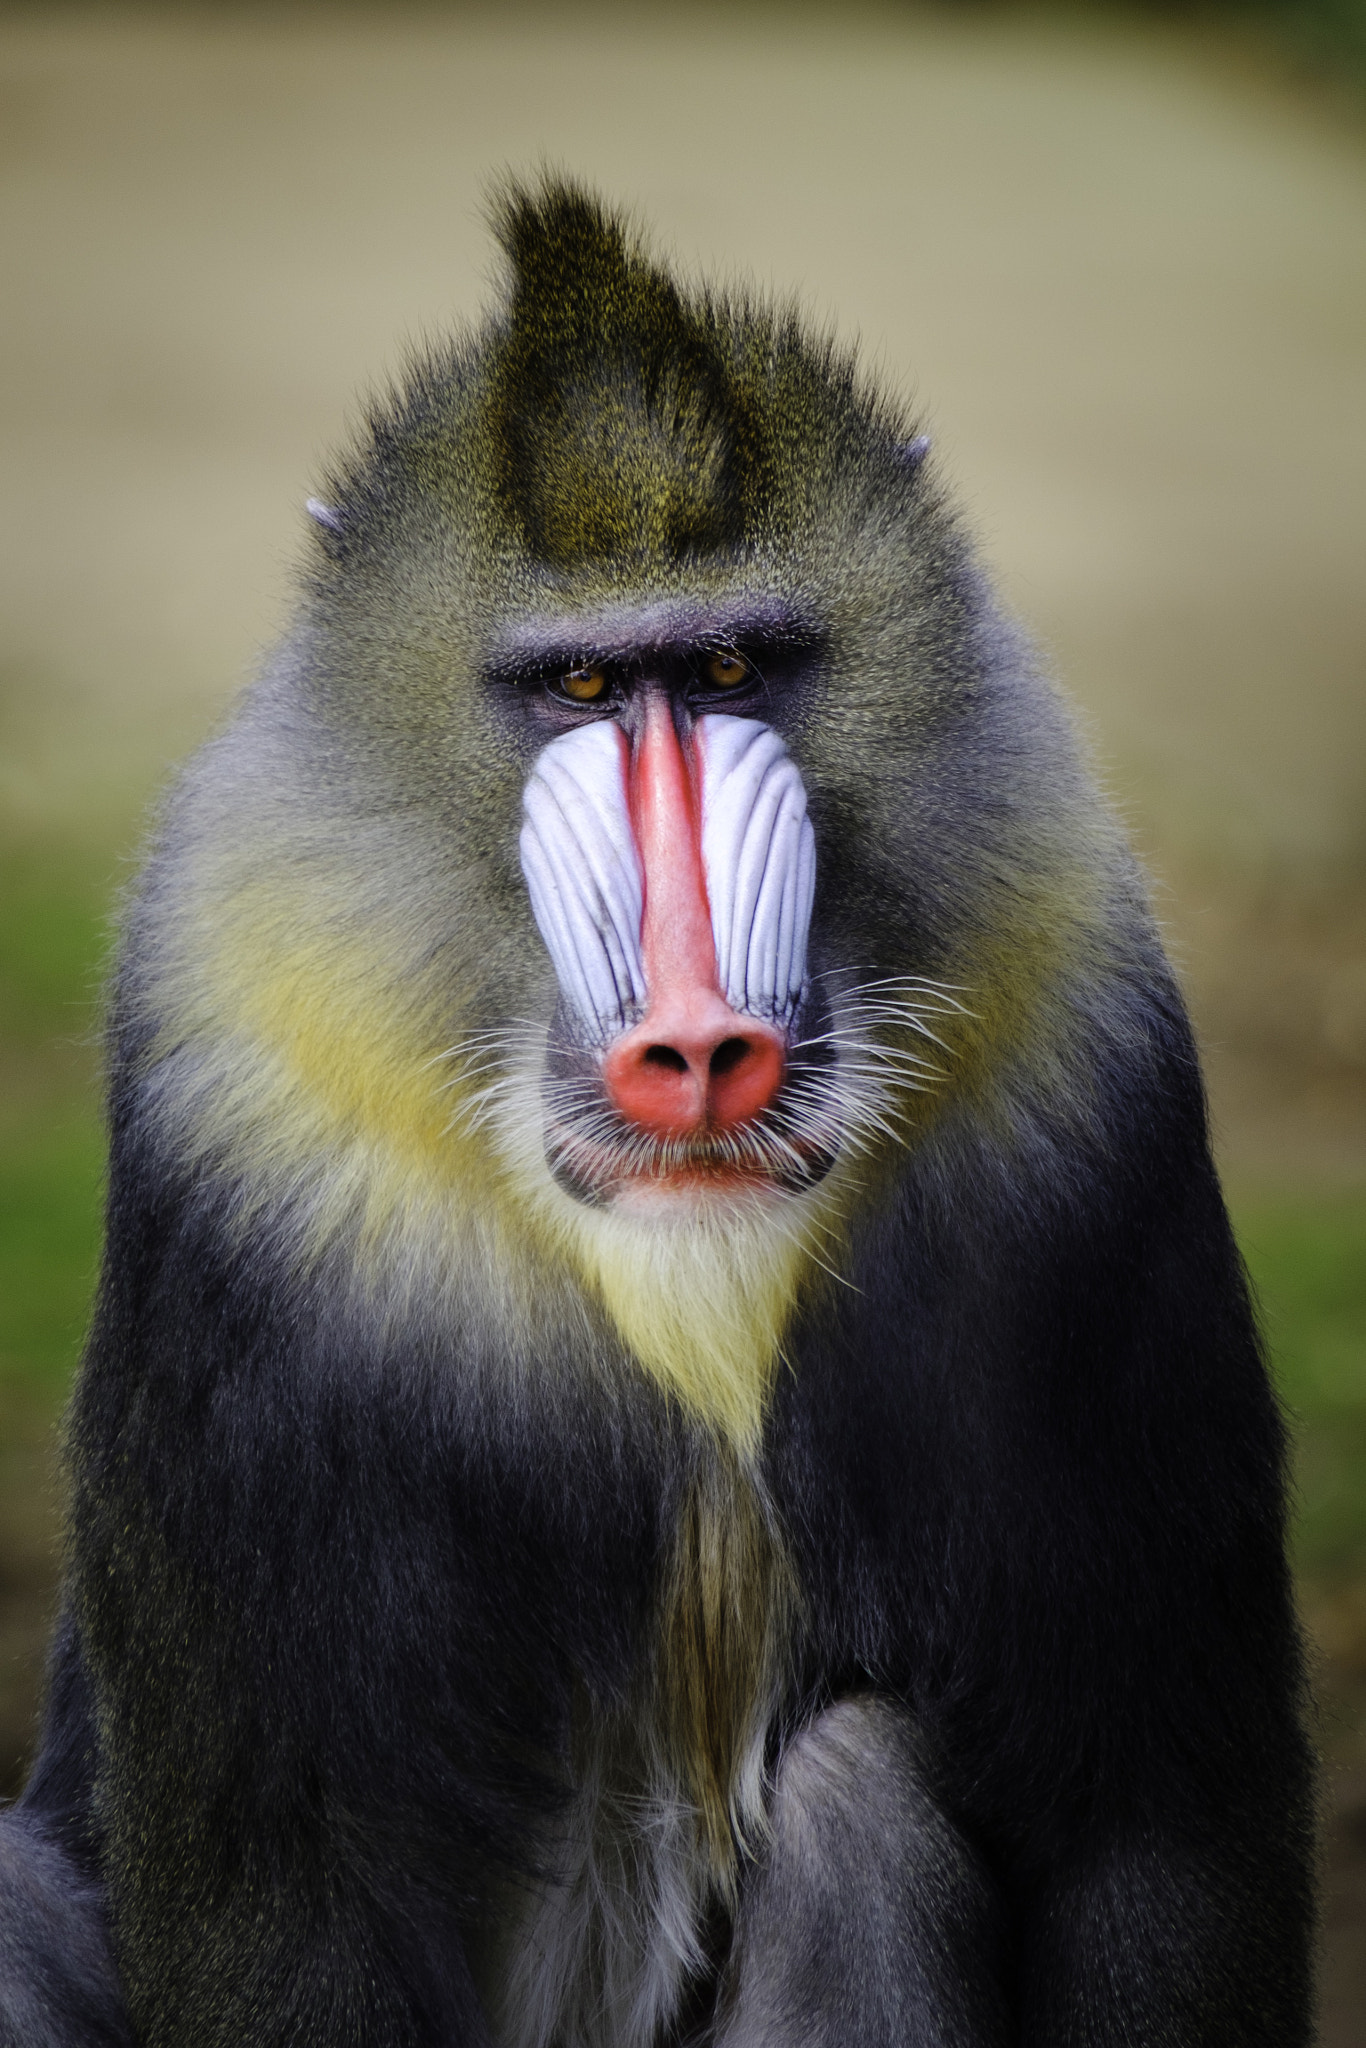 XF100-400mmF4.5-5.6 R LM OIS WR + 1.4x sample photo. Mandrill photography